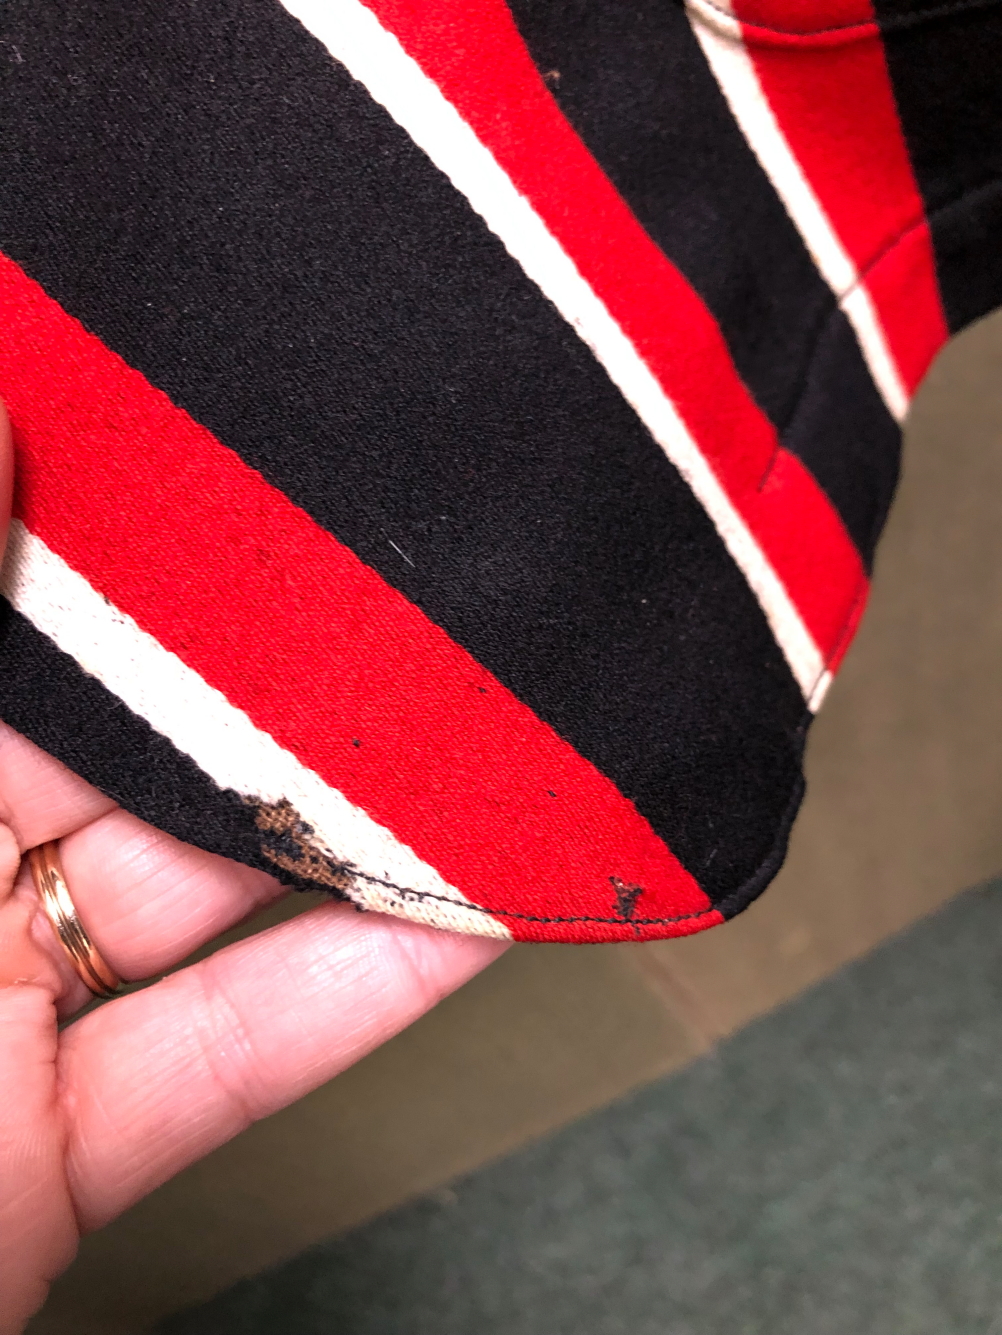 BLAZER. A MANS RED, BLACK AND WHITE BOATING BLAZER WITH ARMORIAL ON THE POCKET. PIT TO PIT 46cms, - Image 7 of 10